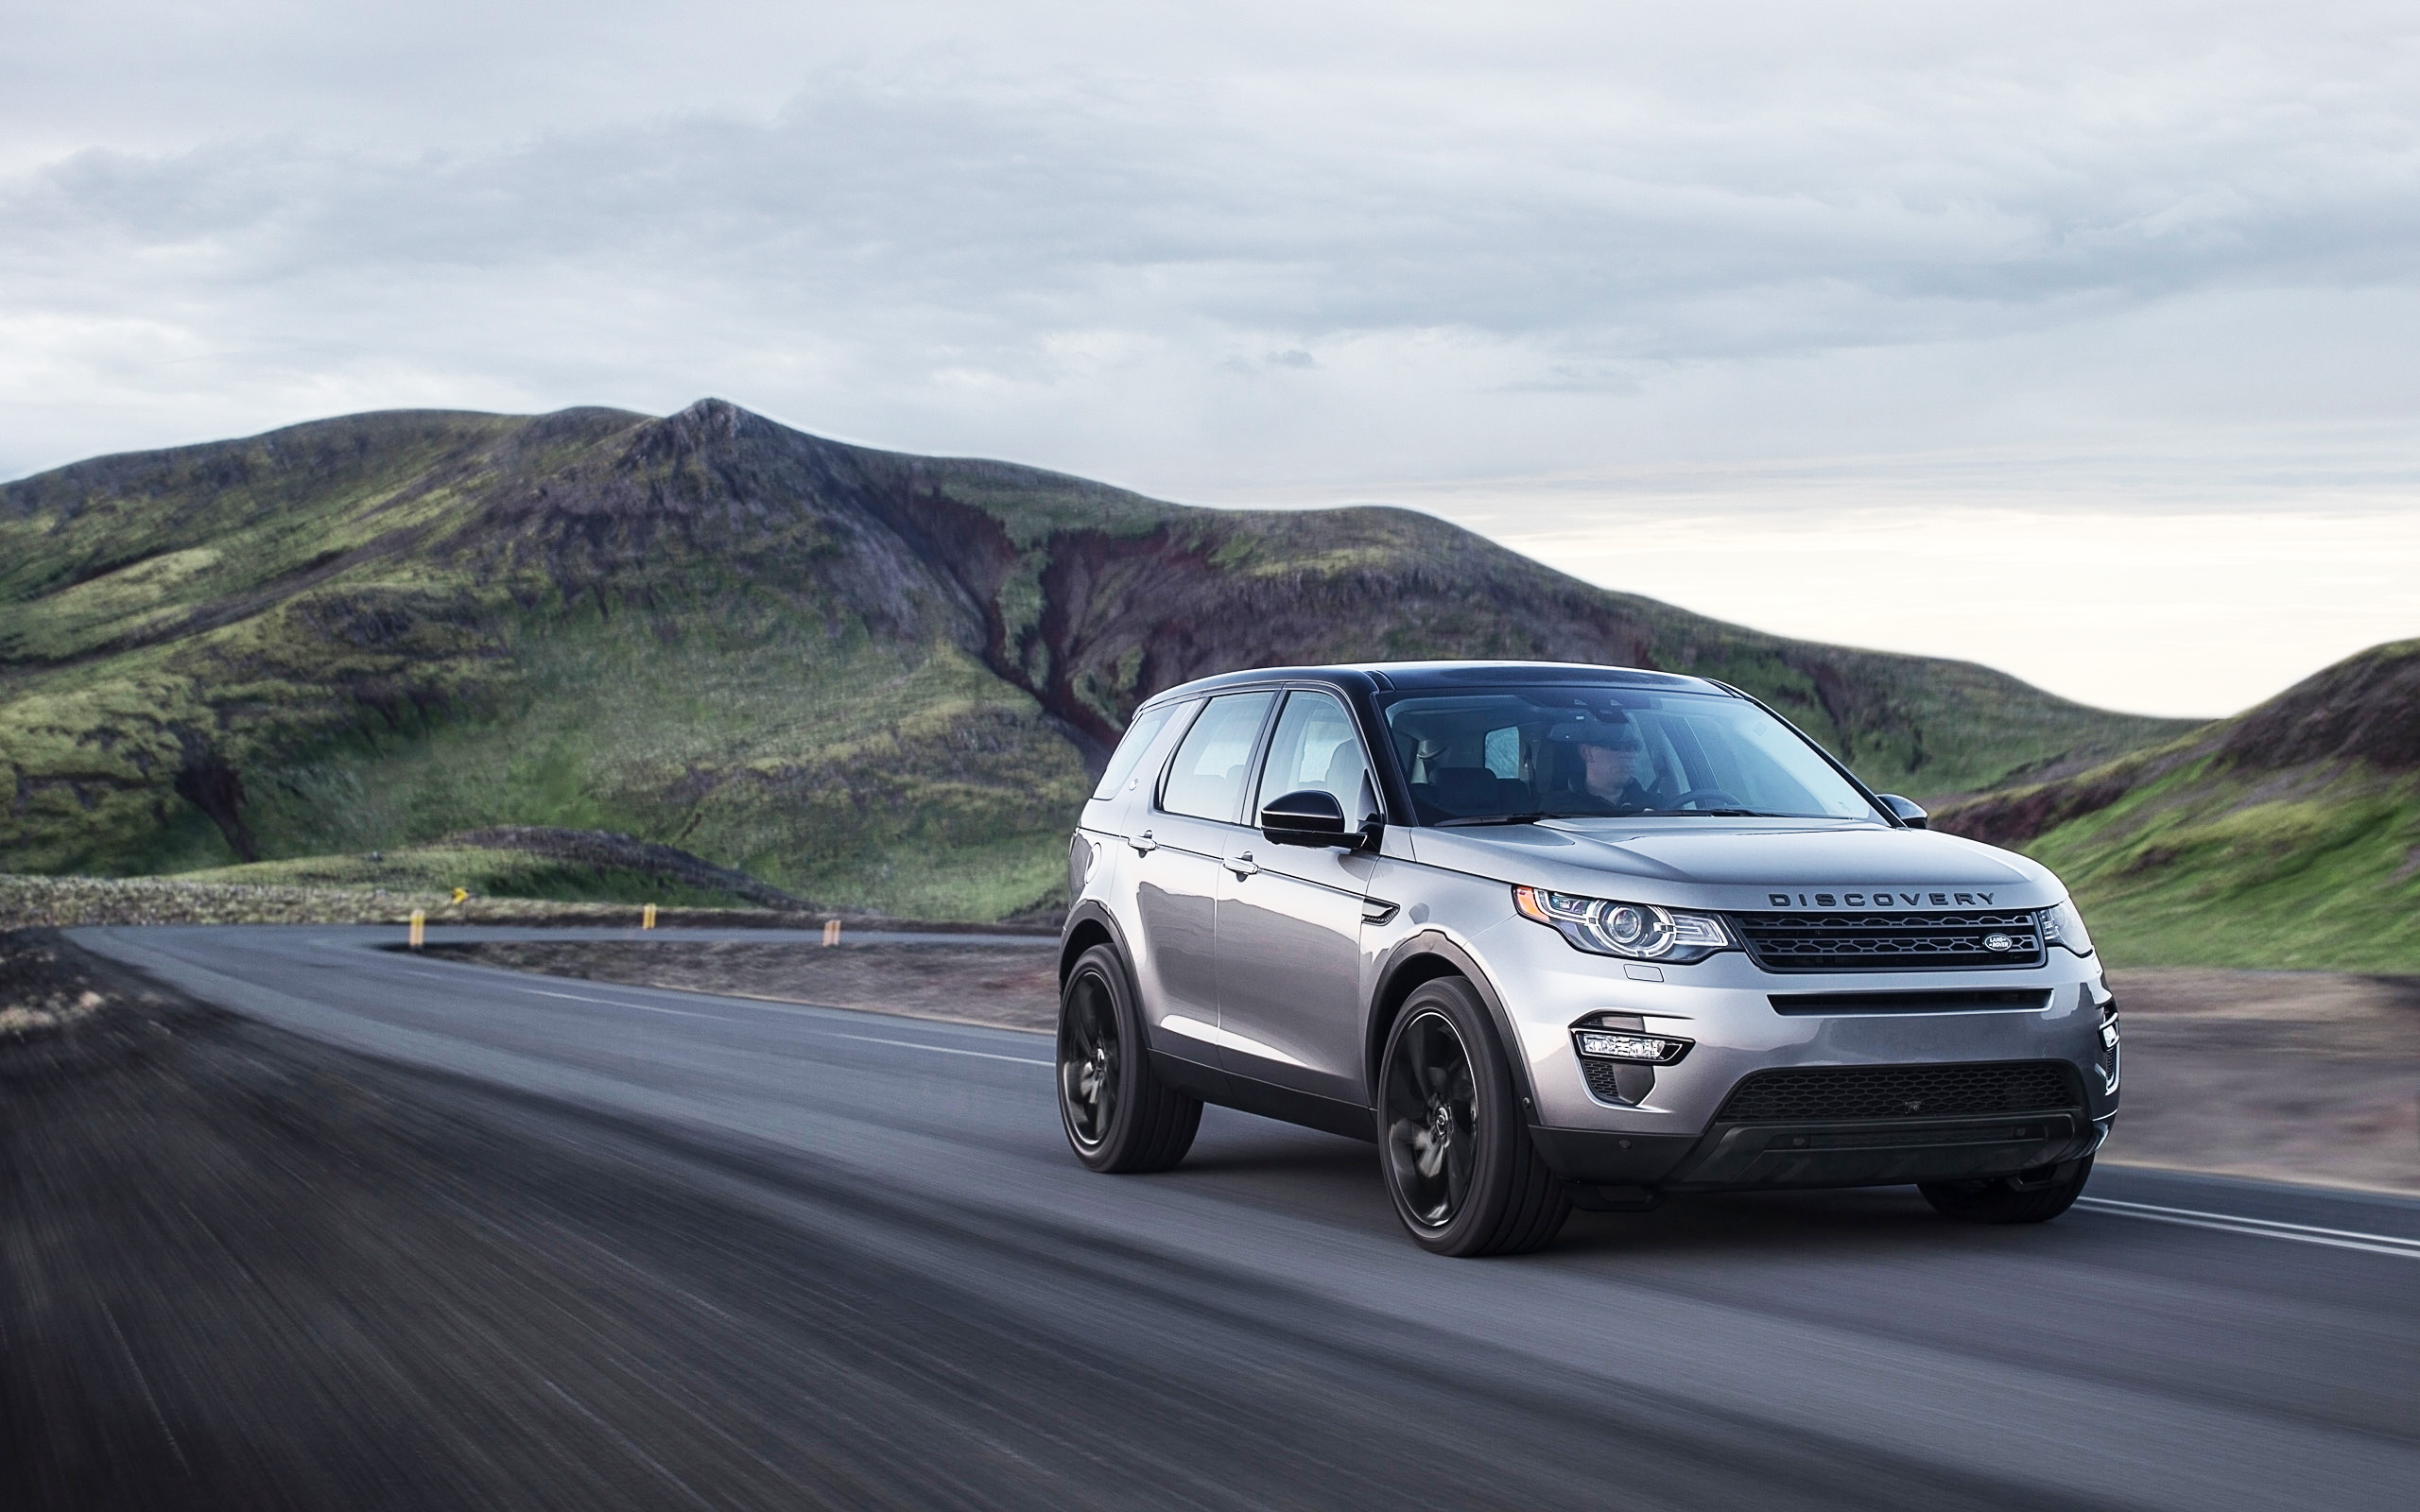 2015 Land Rover Discovery Sport Wallpaper | HD Car Wallpapers | ID #4765